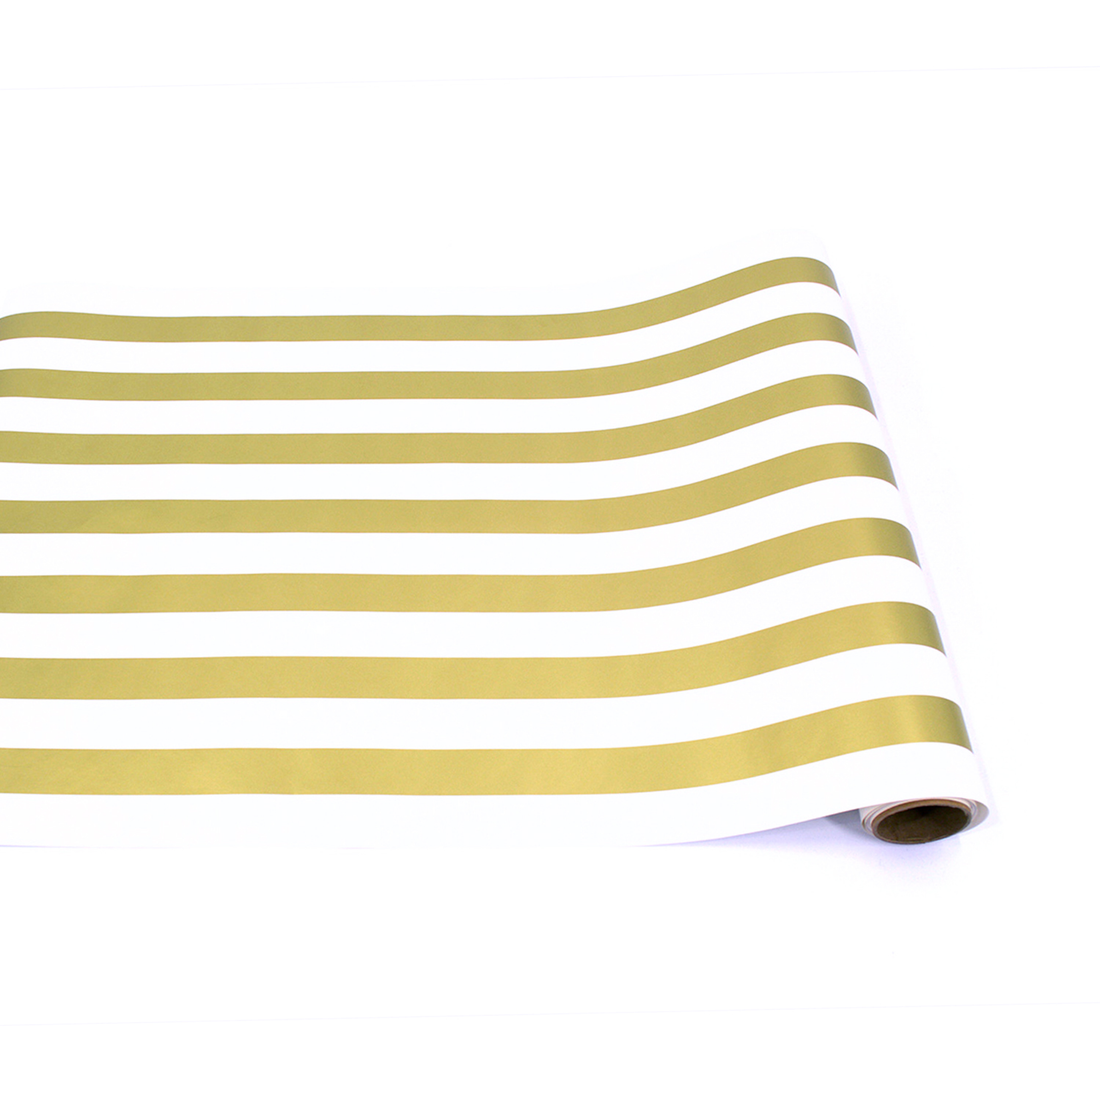 A paper roll with thick gold and white stripes running down the length.